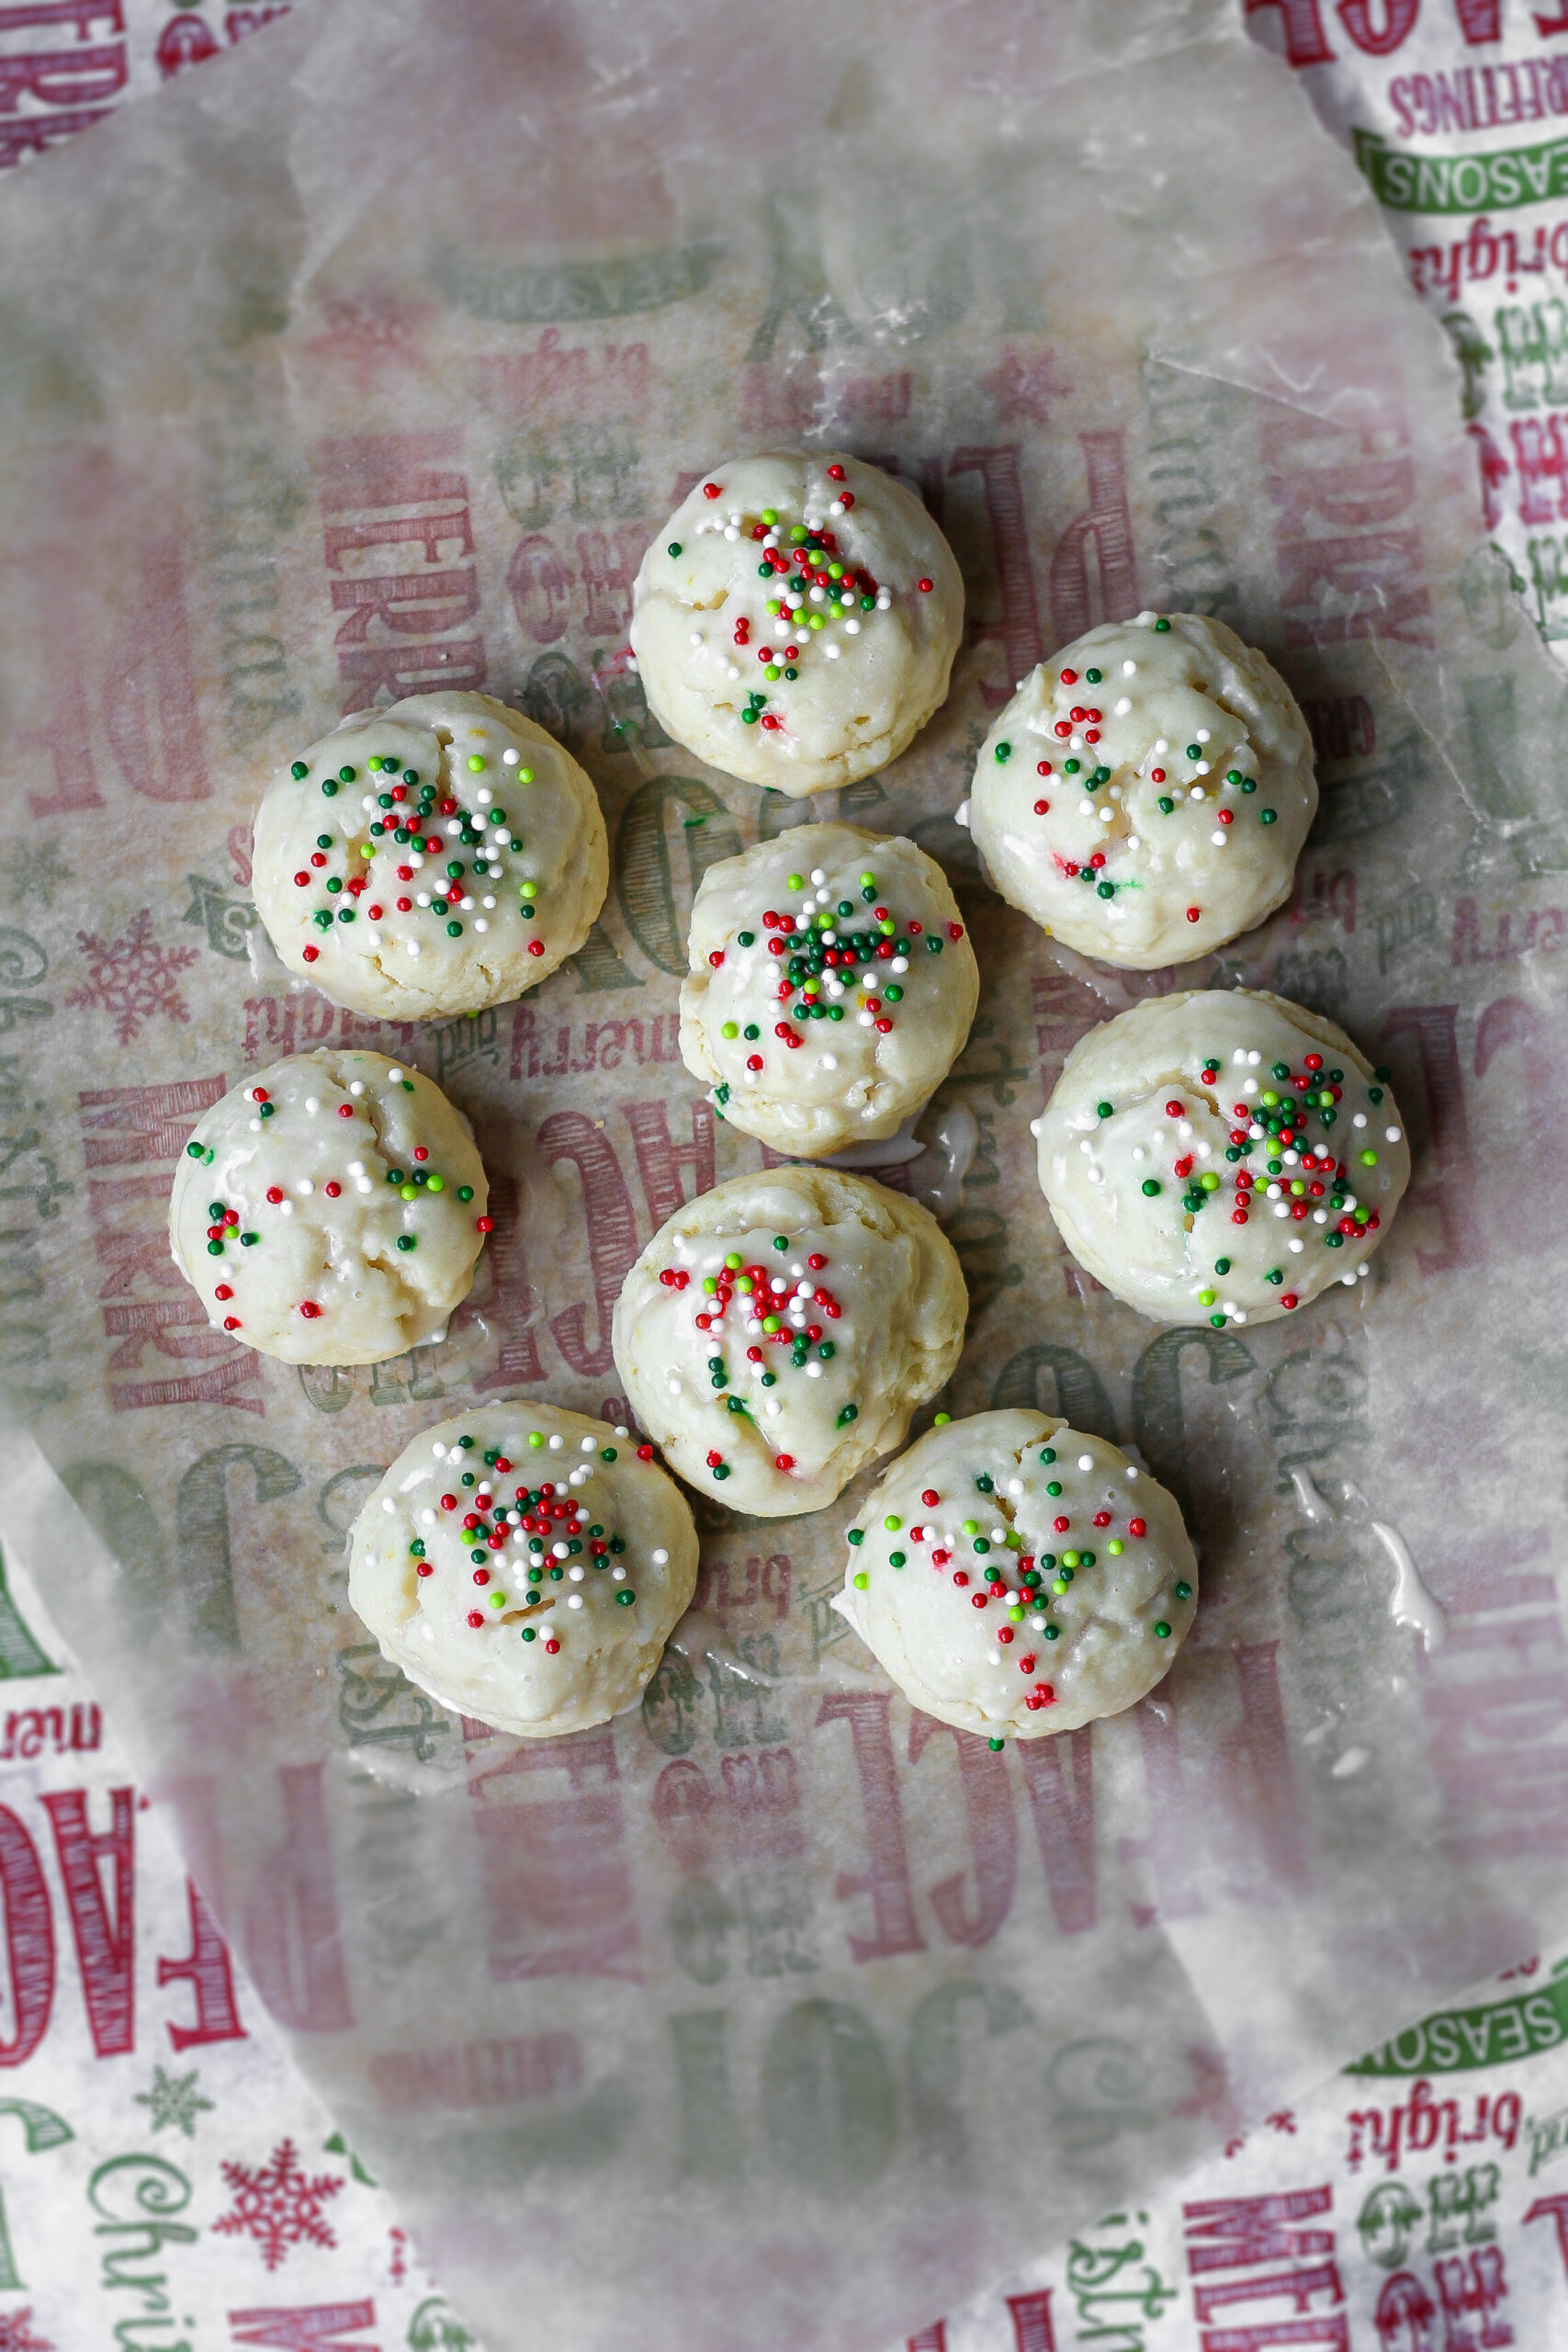 Over shot of the ricotta christmas cookies